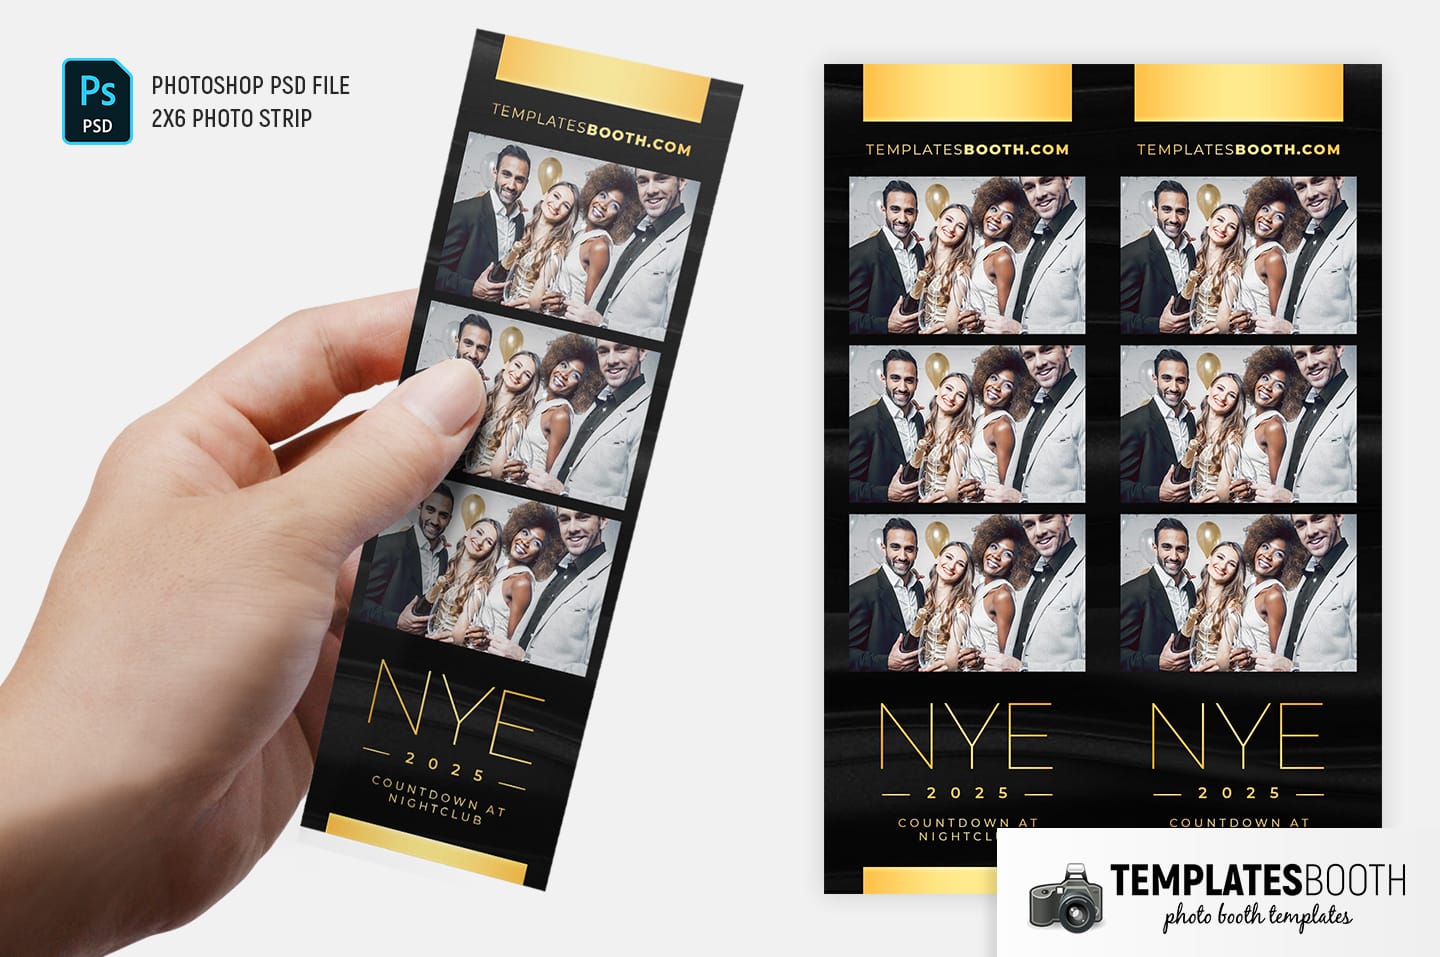 New Year's Eve Photo Booth Template (2x6 photo strip)